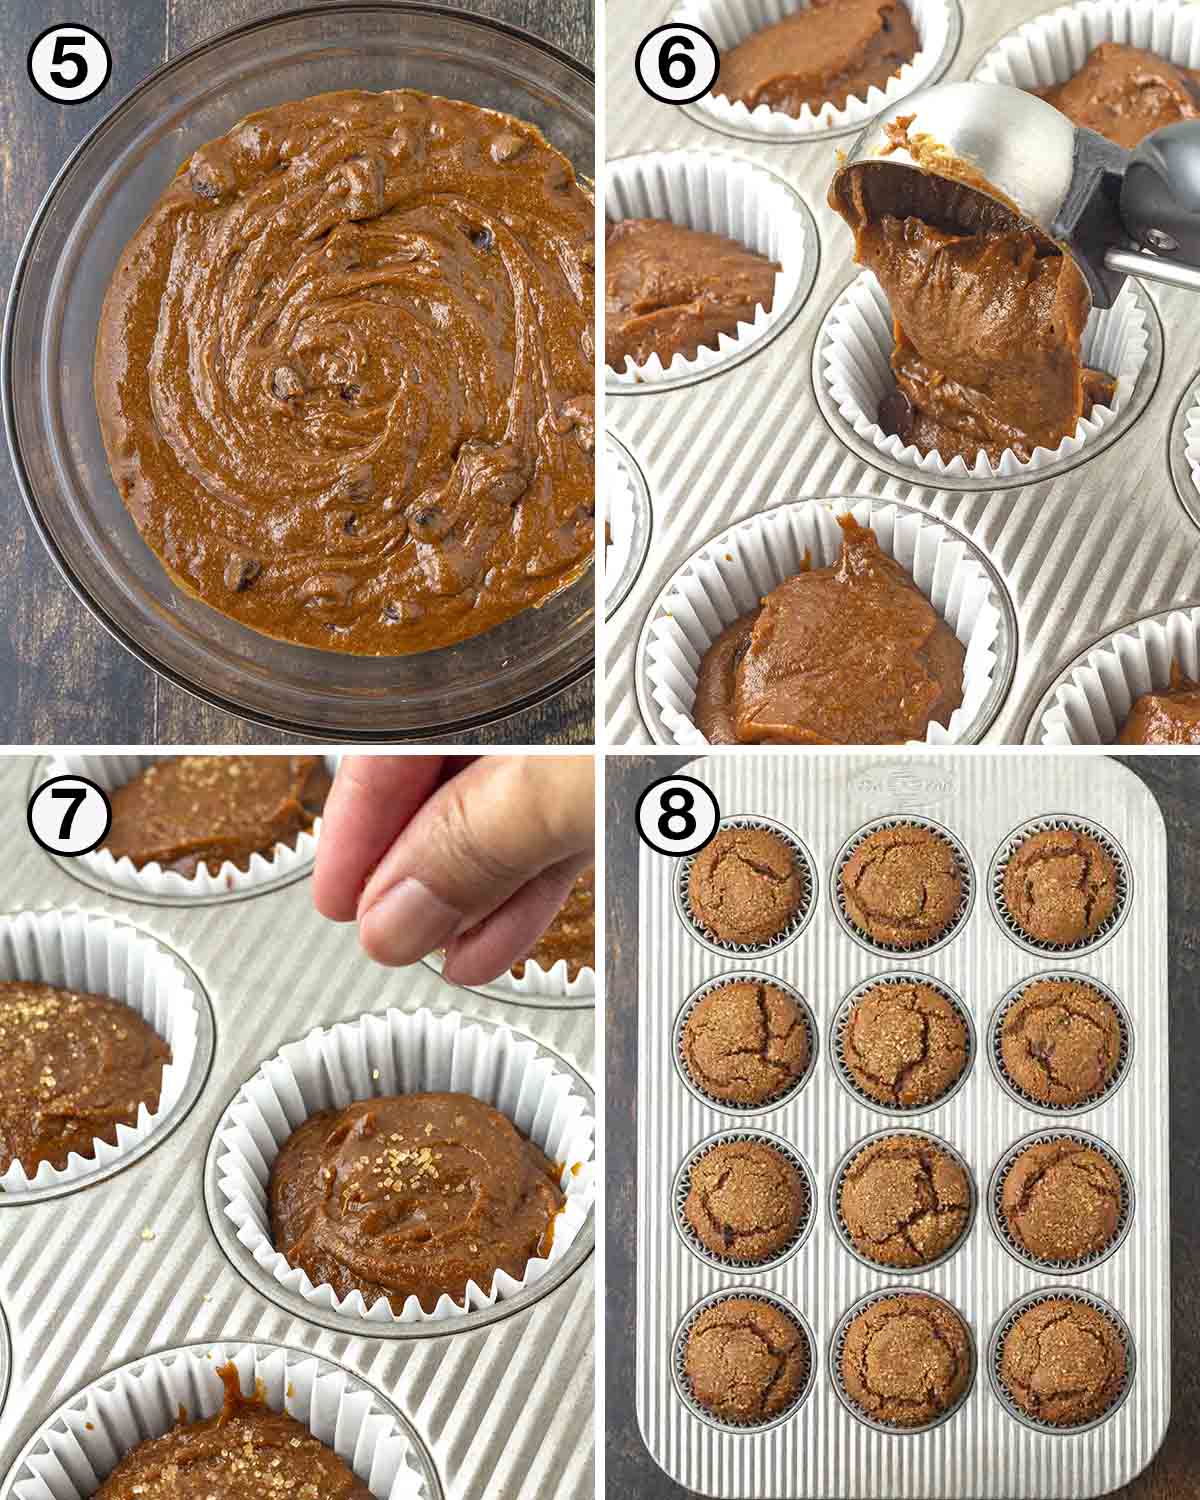 A collage of four images showing the second sequence of steps needed to make vegan gingerbread muffins.